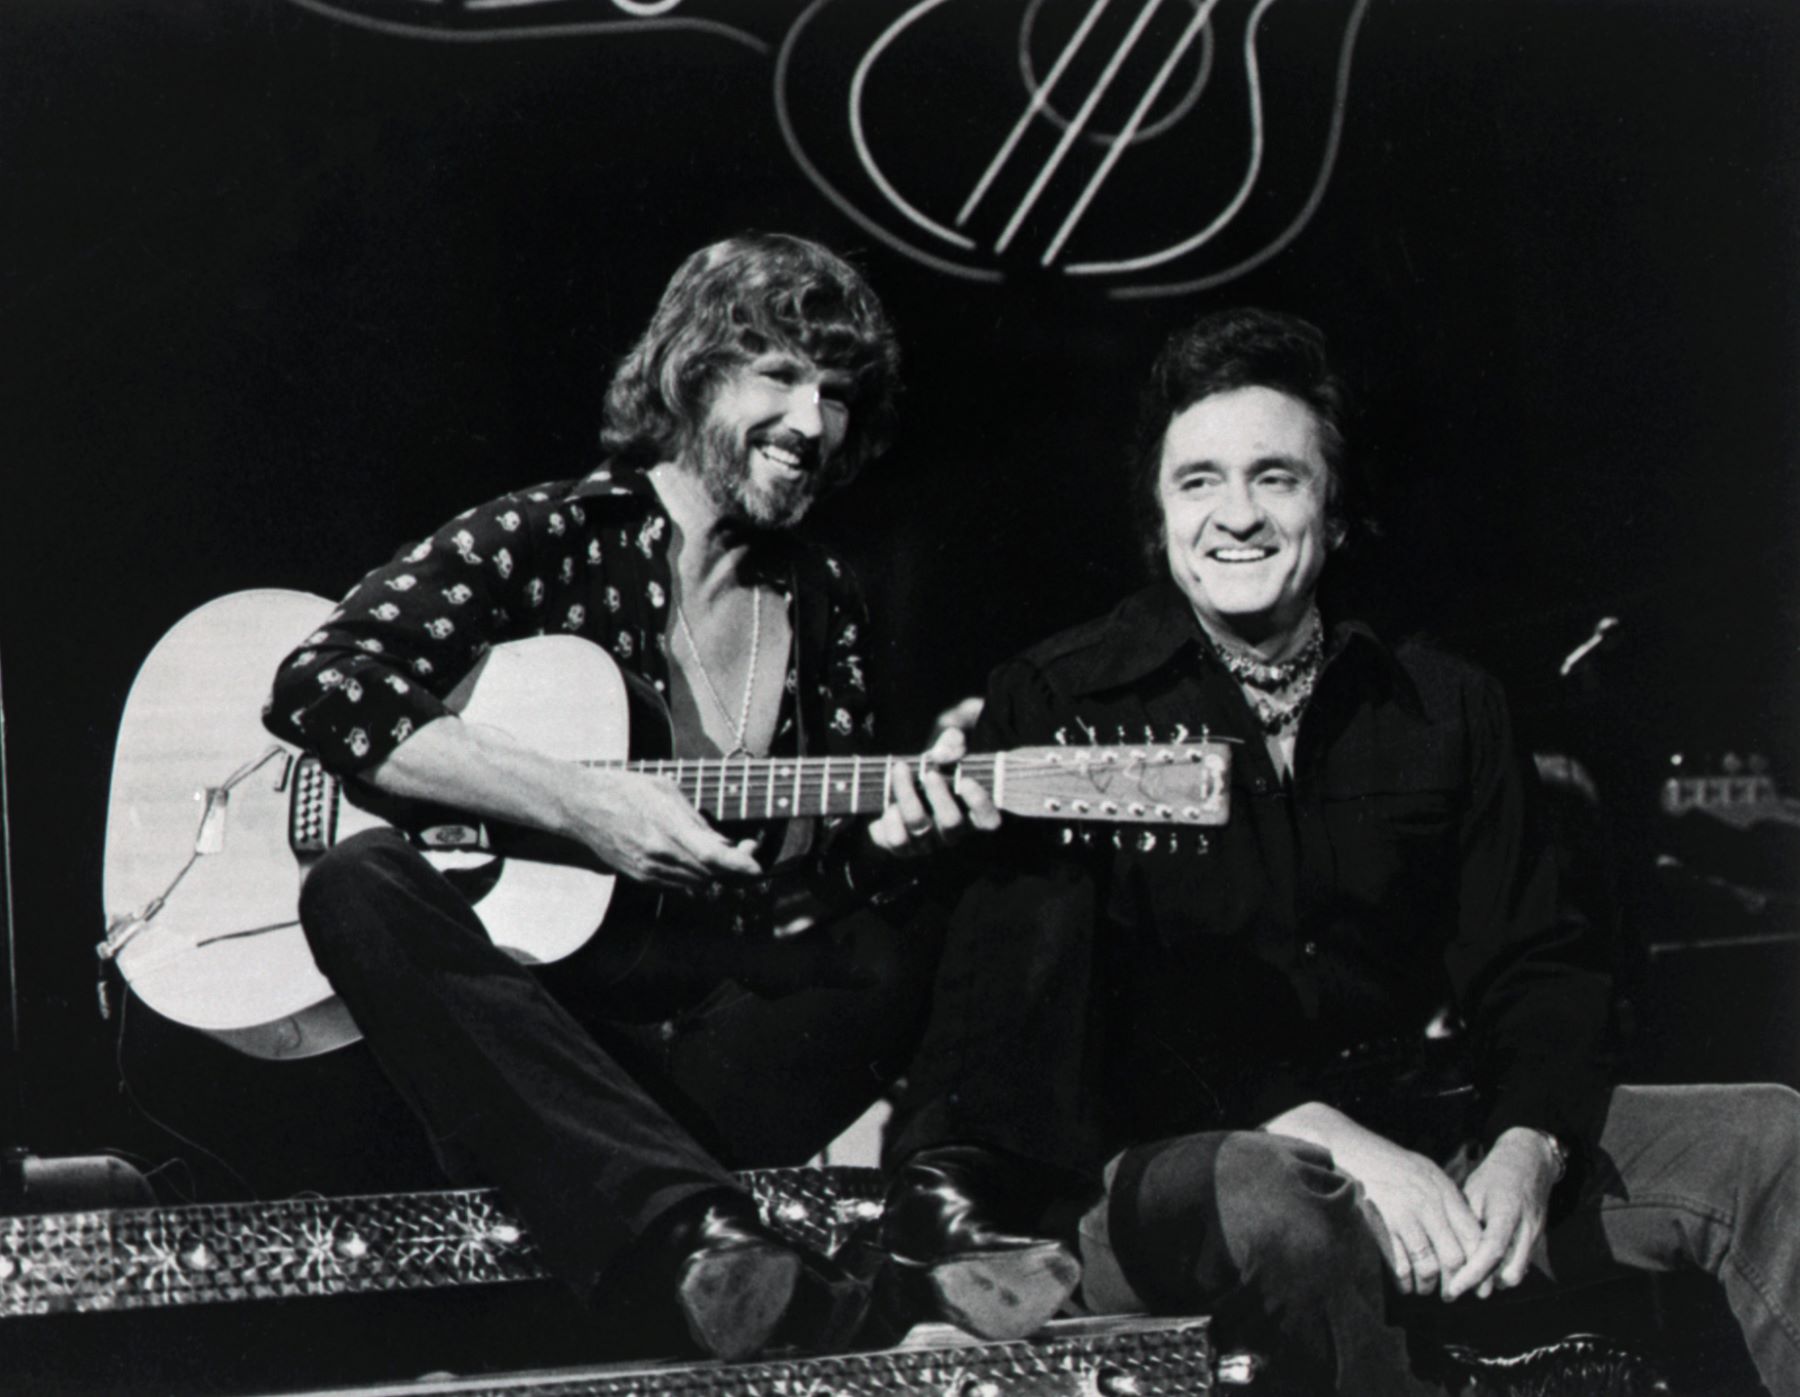 Kris Kristofferson (L) and Johnny Cash (R) performing a duet on 'The Johnny Cash Show' in 1976